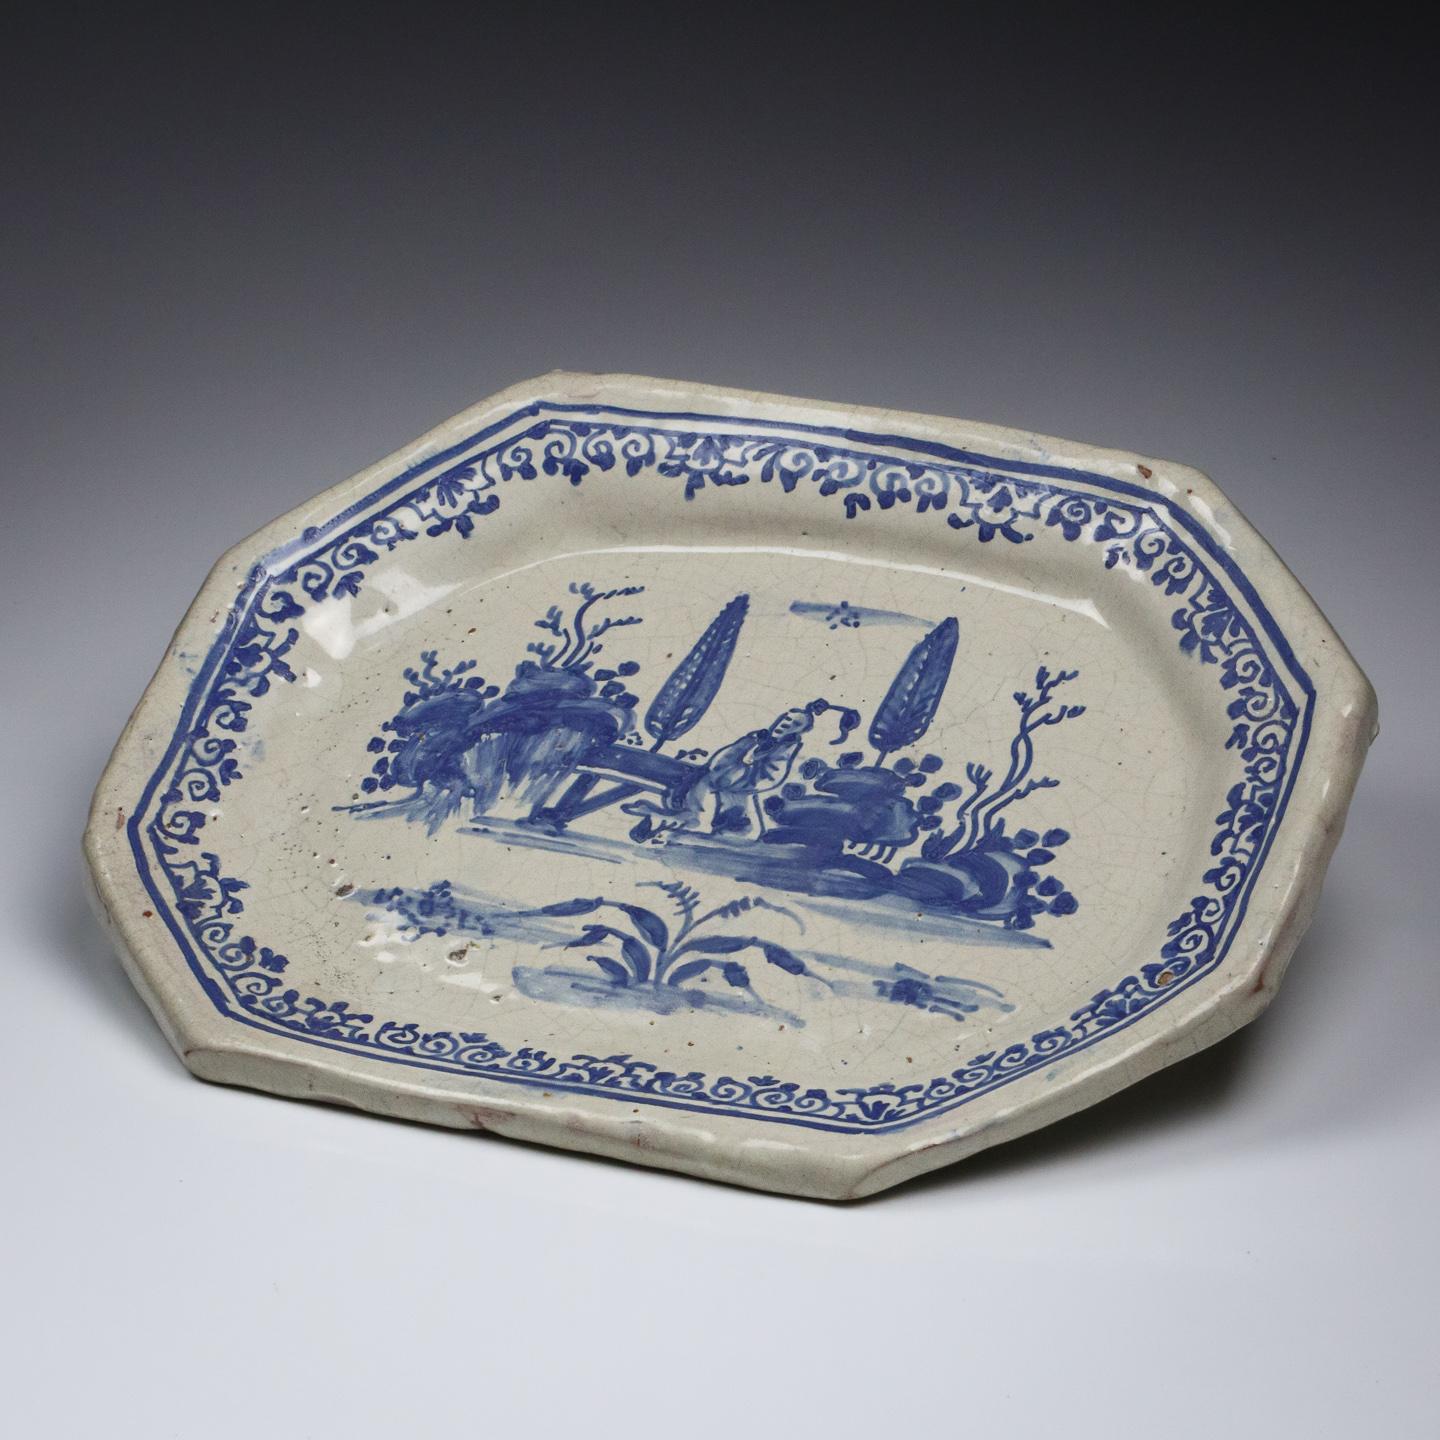 Small 18th Century Blue and White Italian Serving Dish In Fair Condition For Sale In Pease pottage, West Sussex